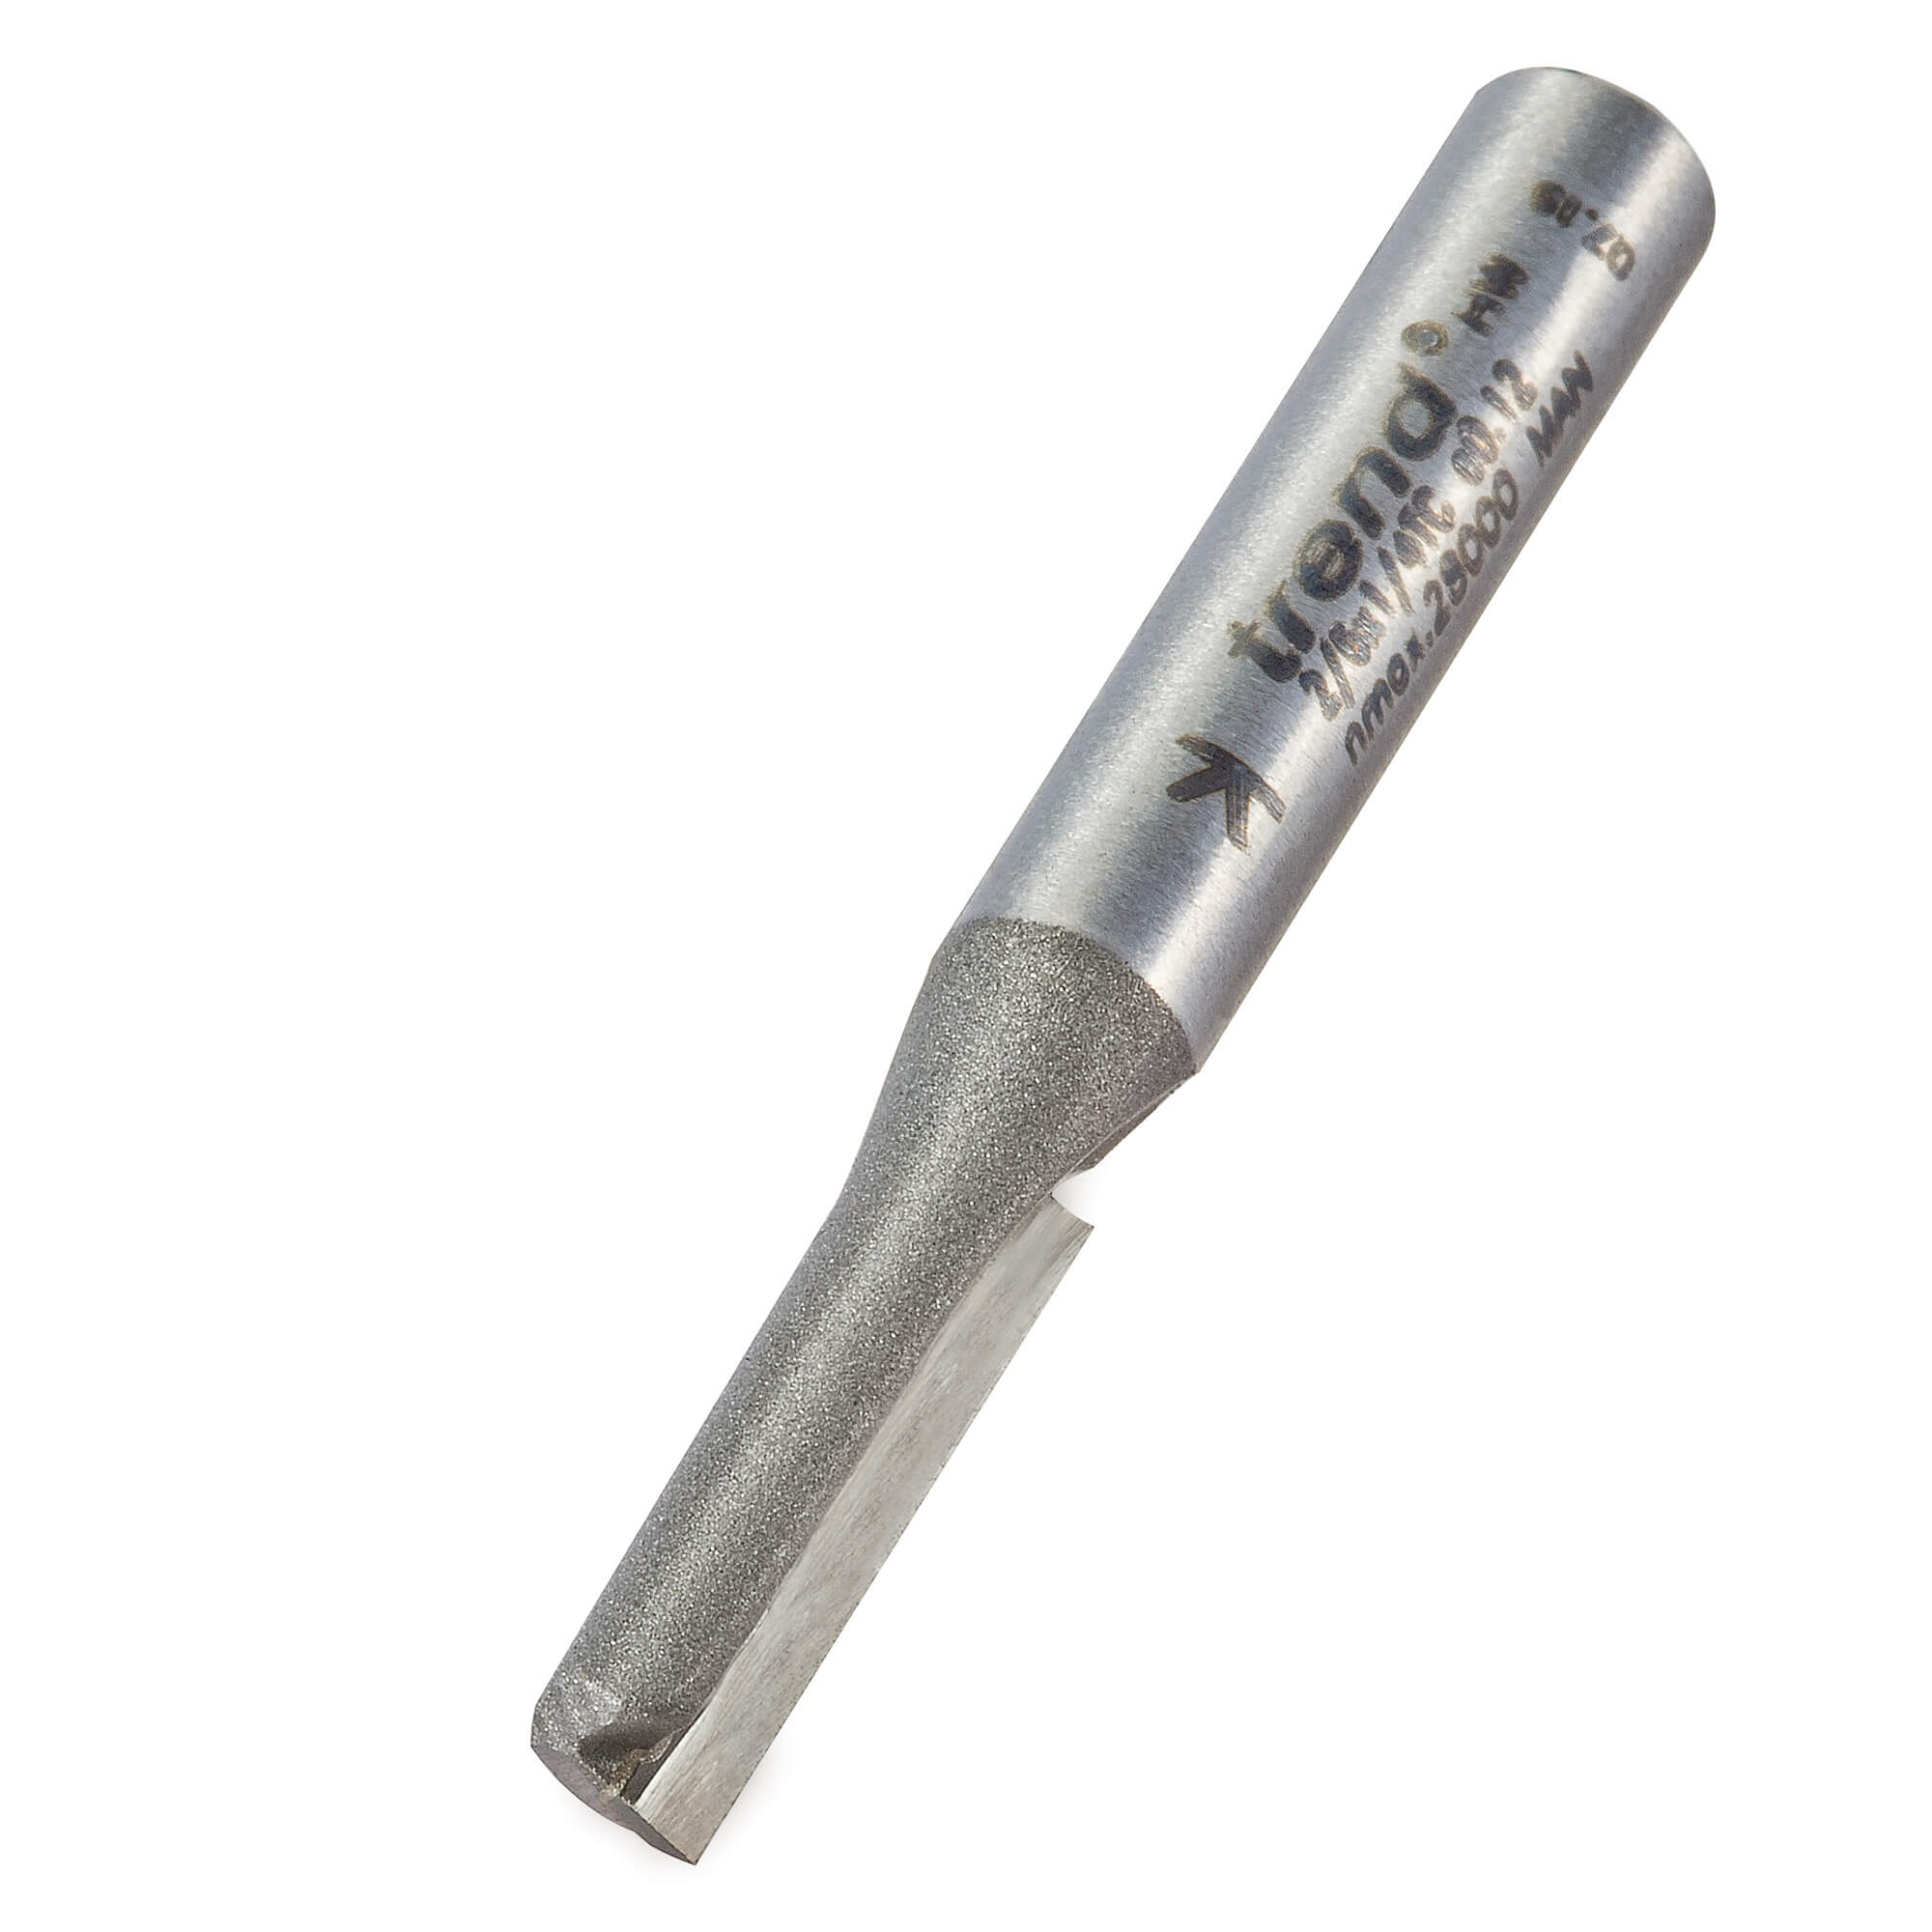 Image of Trend Eccentric Single Flute Router Cutter 6.3mm 19mm 1/4"